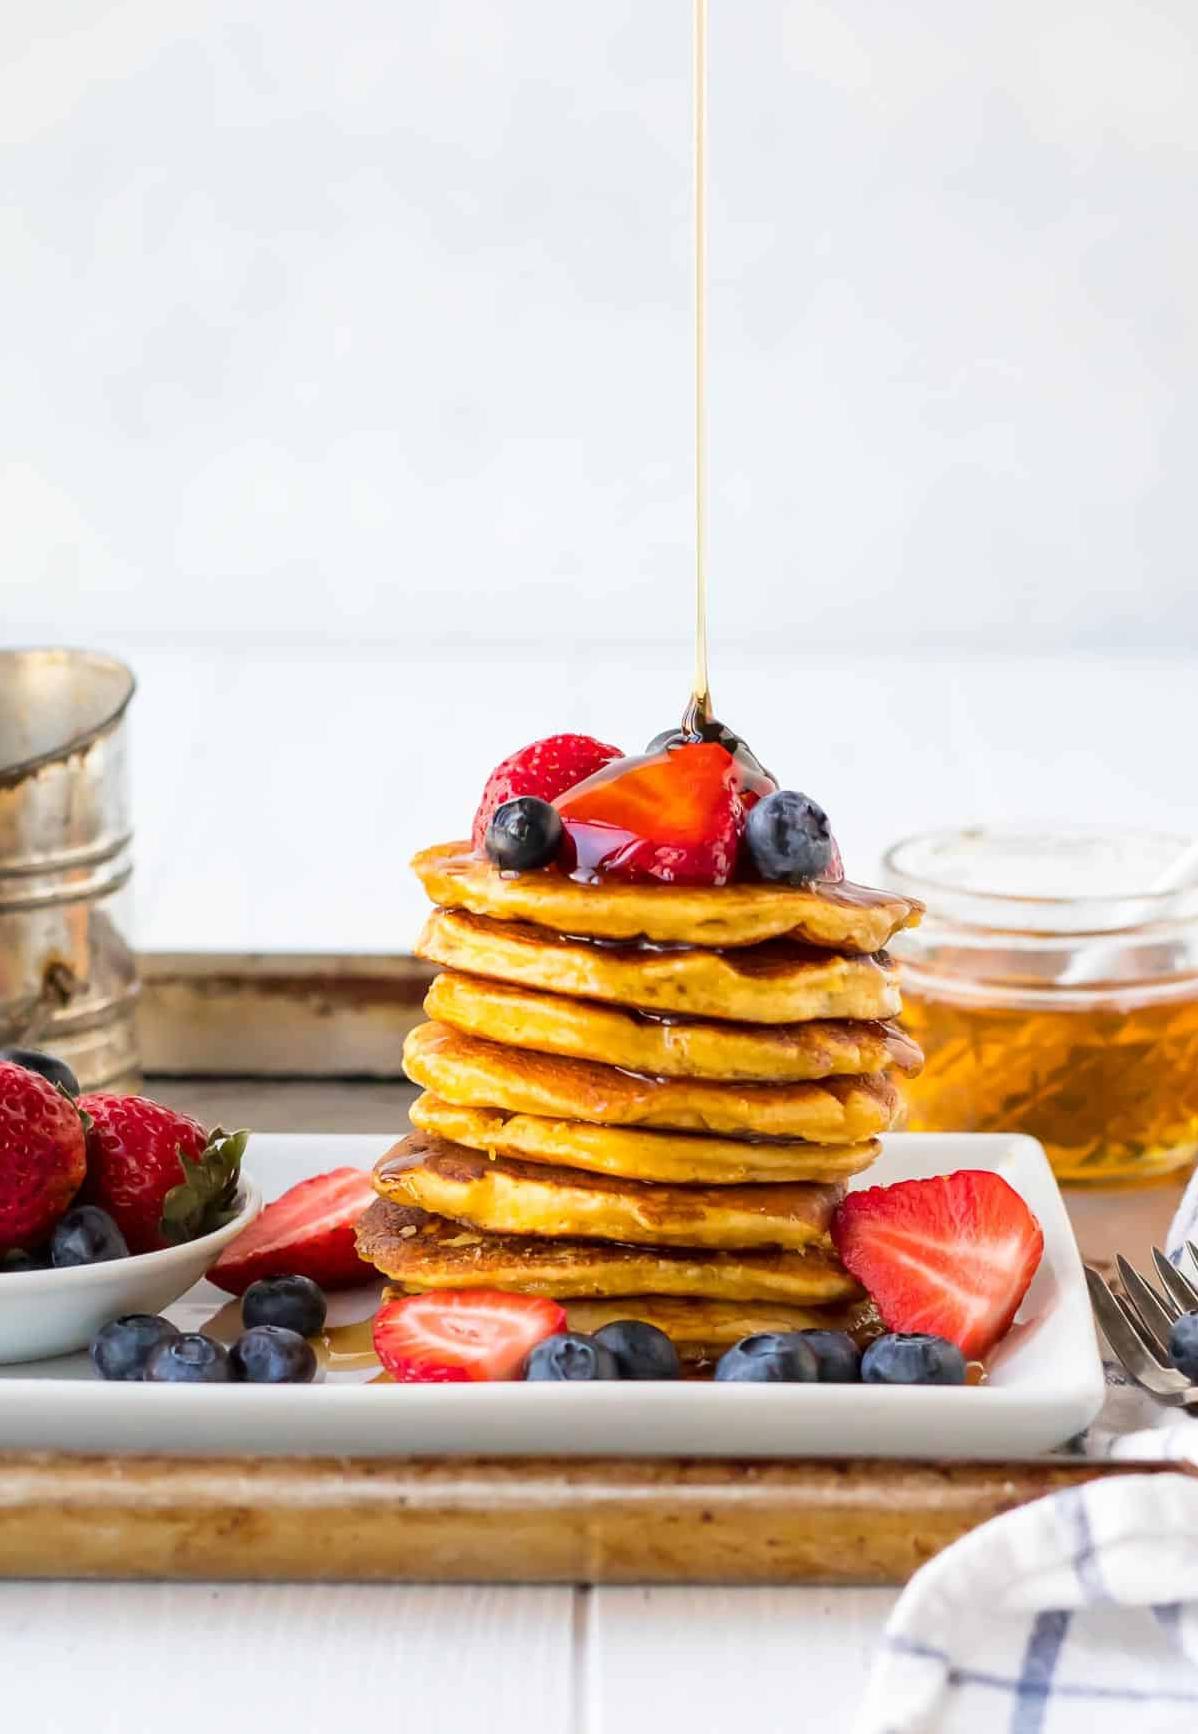  The perfect topping for these pancakes? Fresh berries!